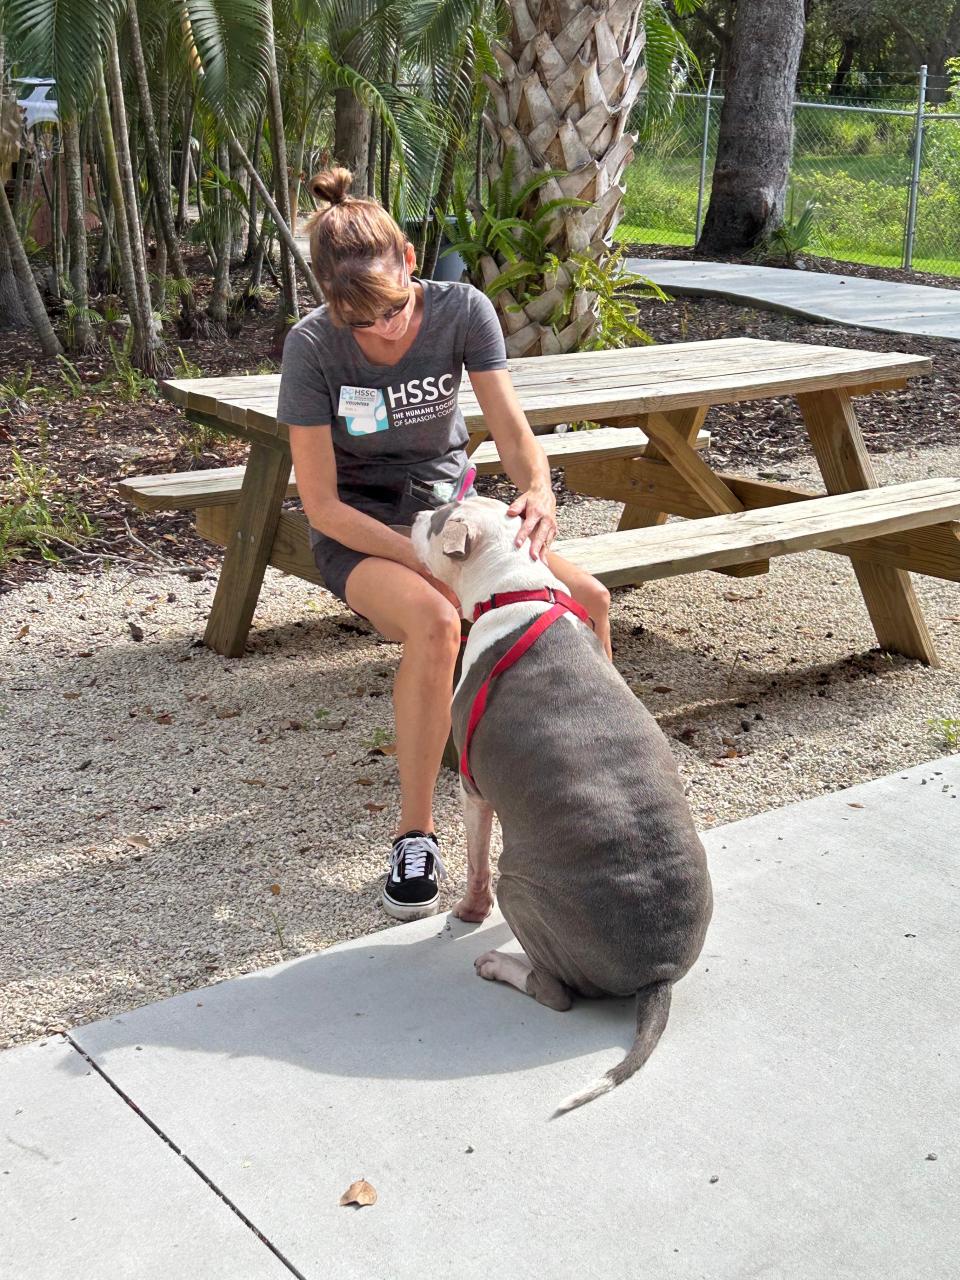 Humane Society of Sarasota County volunteer Erin Clinton takes a moment to provide encouragement to Bowser, a dog who came to the humane society as a stray in June. The Humane Society of Sarasota County is a no-kill shelter, and the Sarasota city commissioners are considering a proposal to ban animal shelters that don't operate as no-kill facilities.